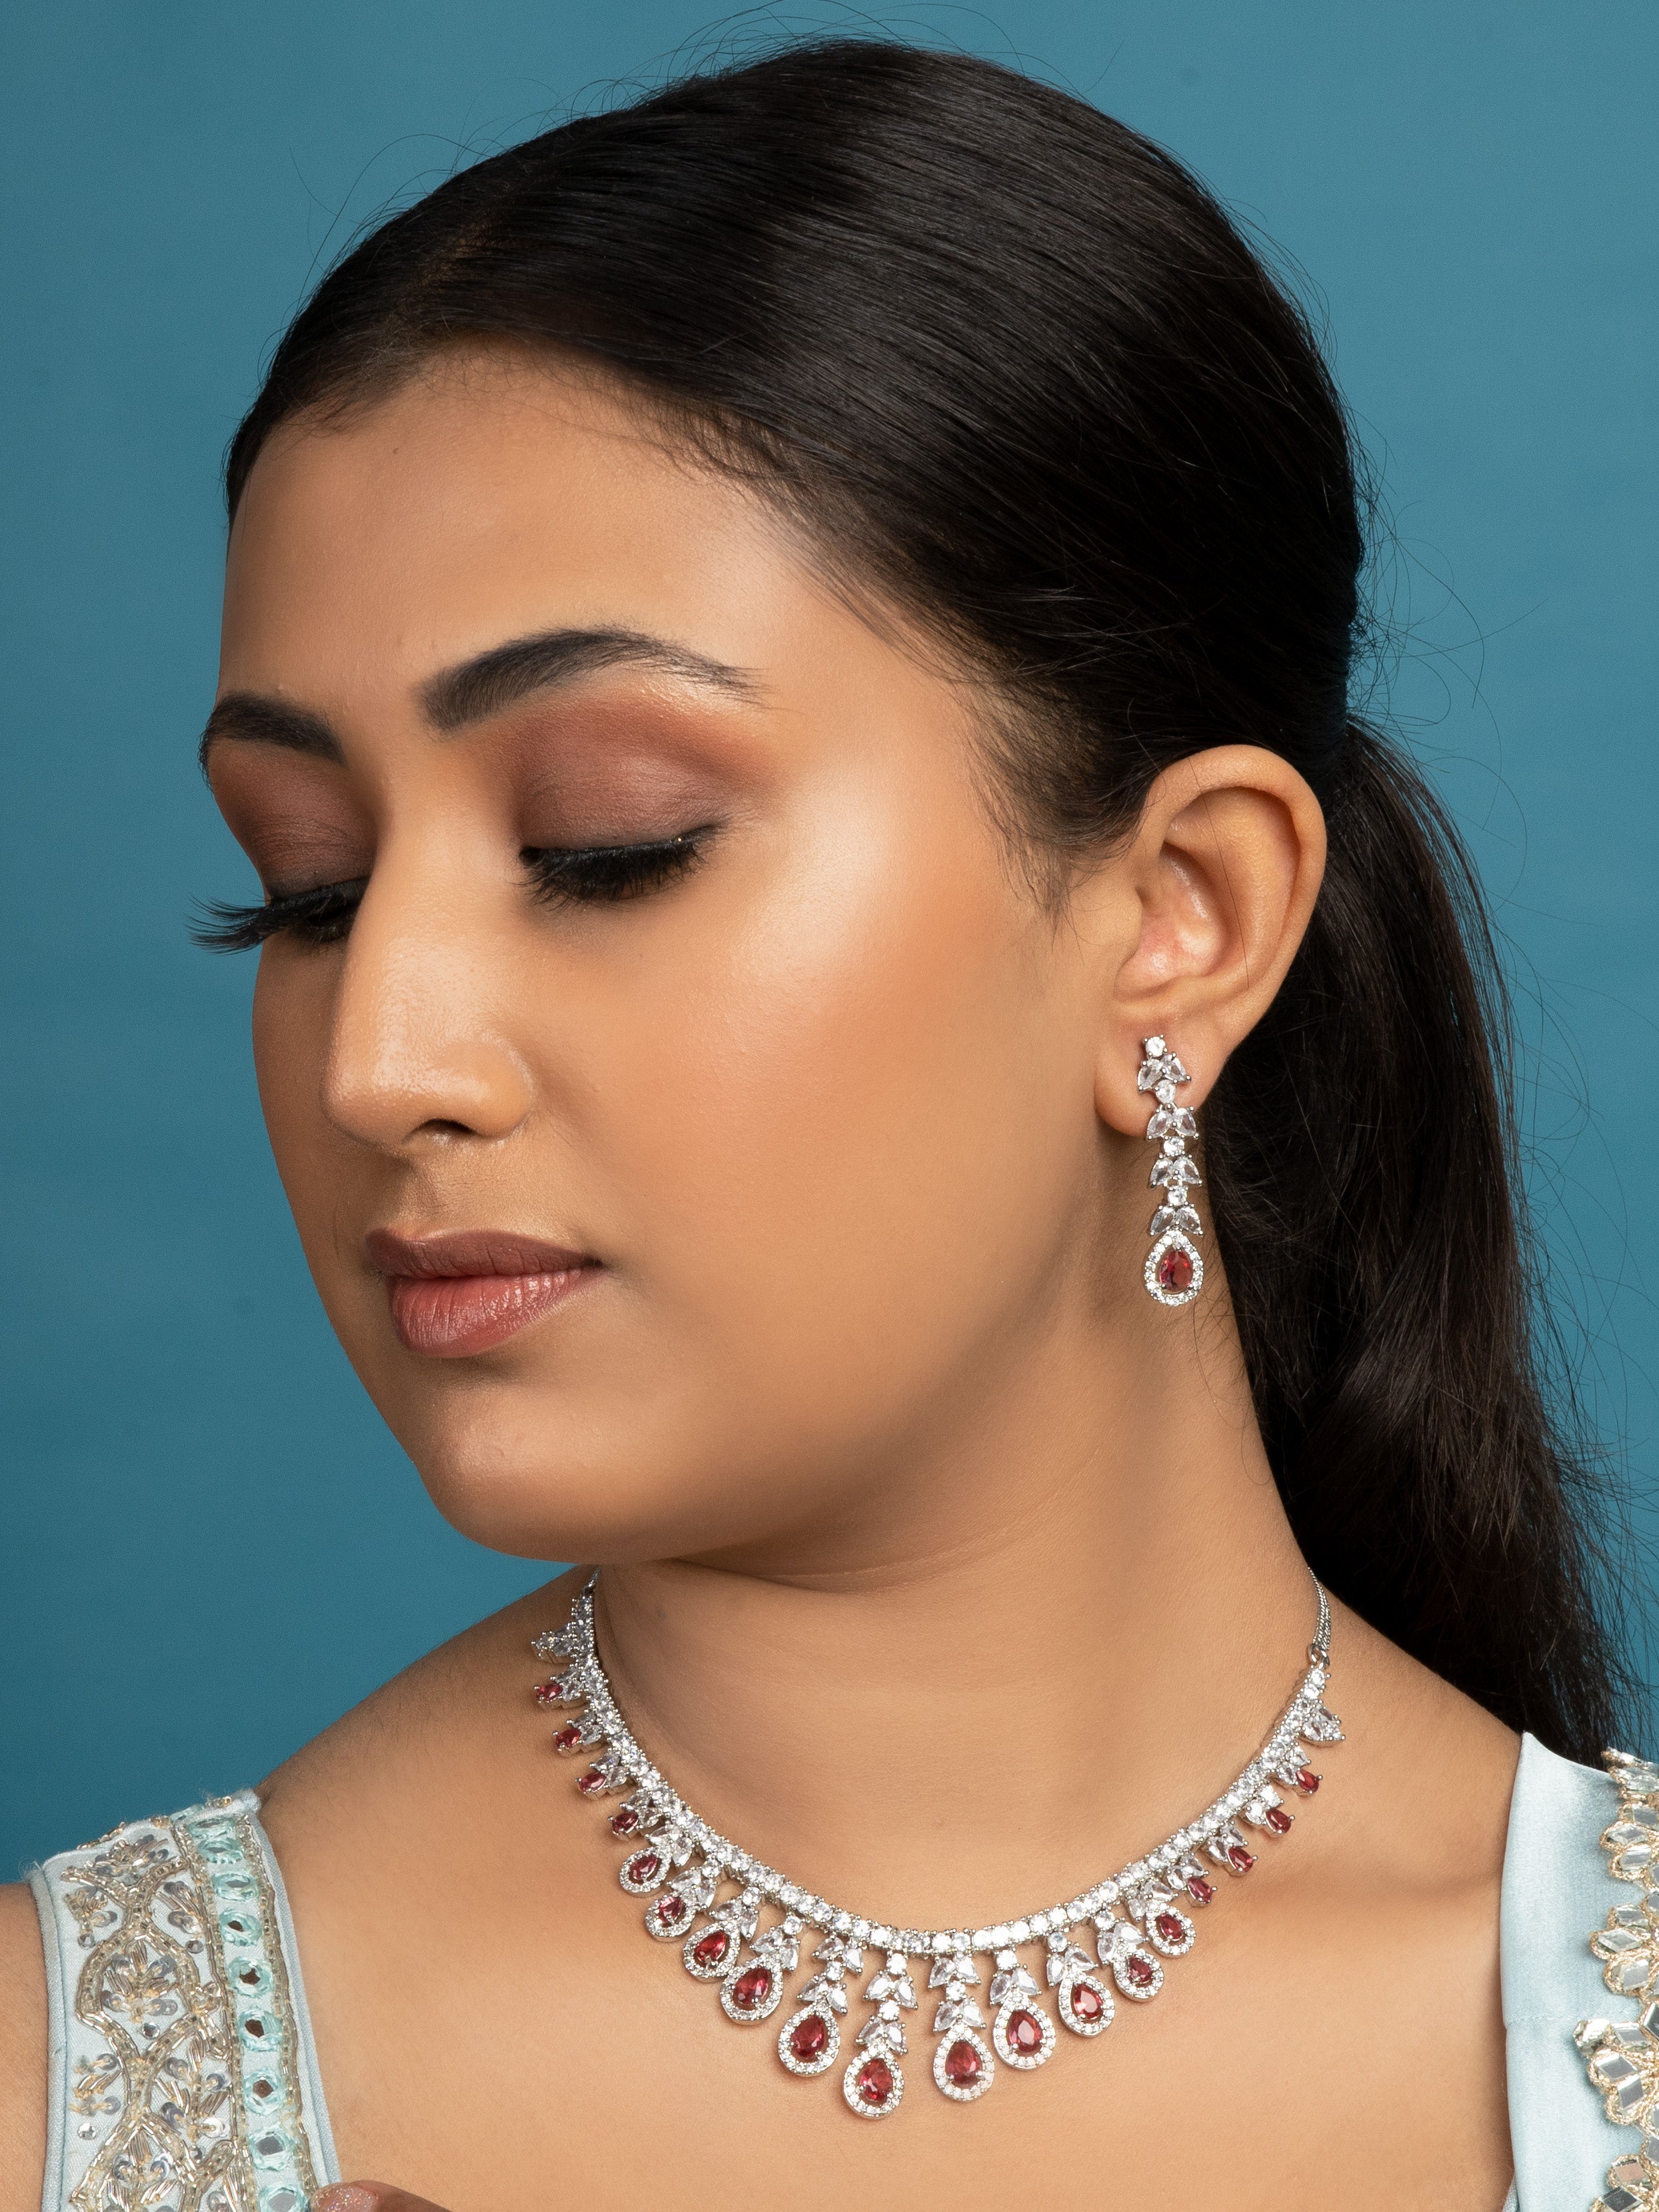 Nayaab American Diamond Choker with Earrings (Necklace and Earrings Set) - QUEENS JEWELS